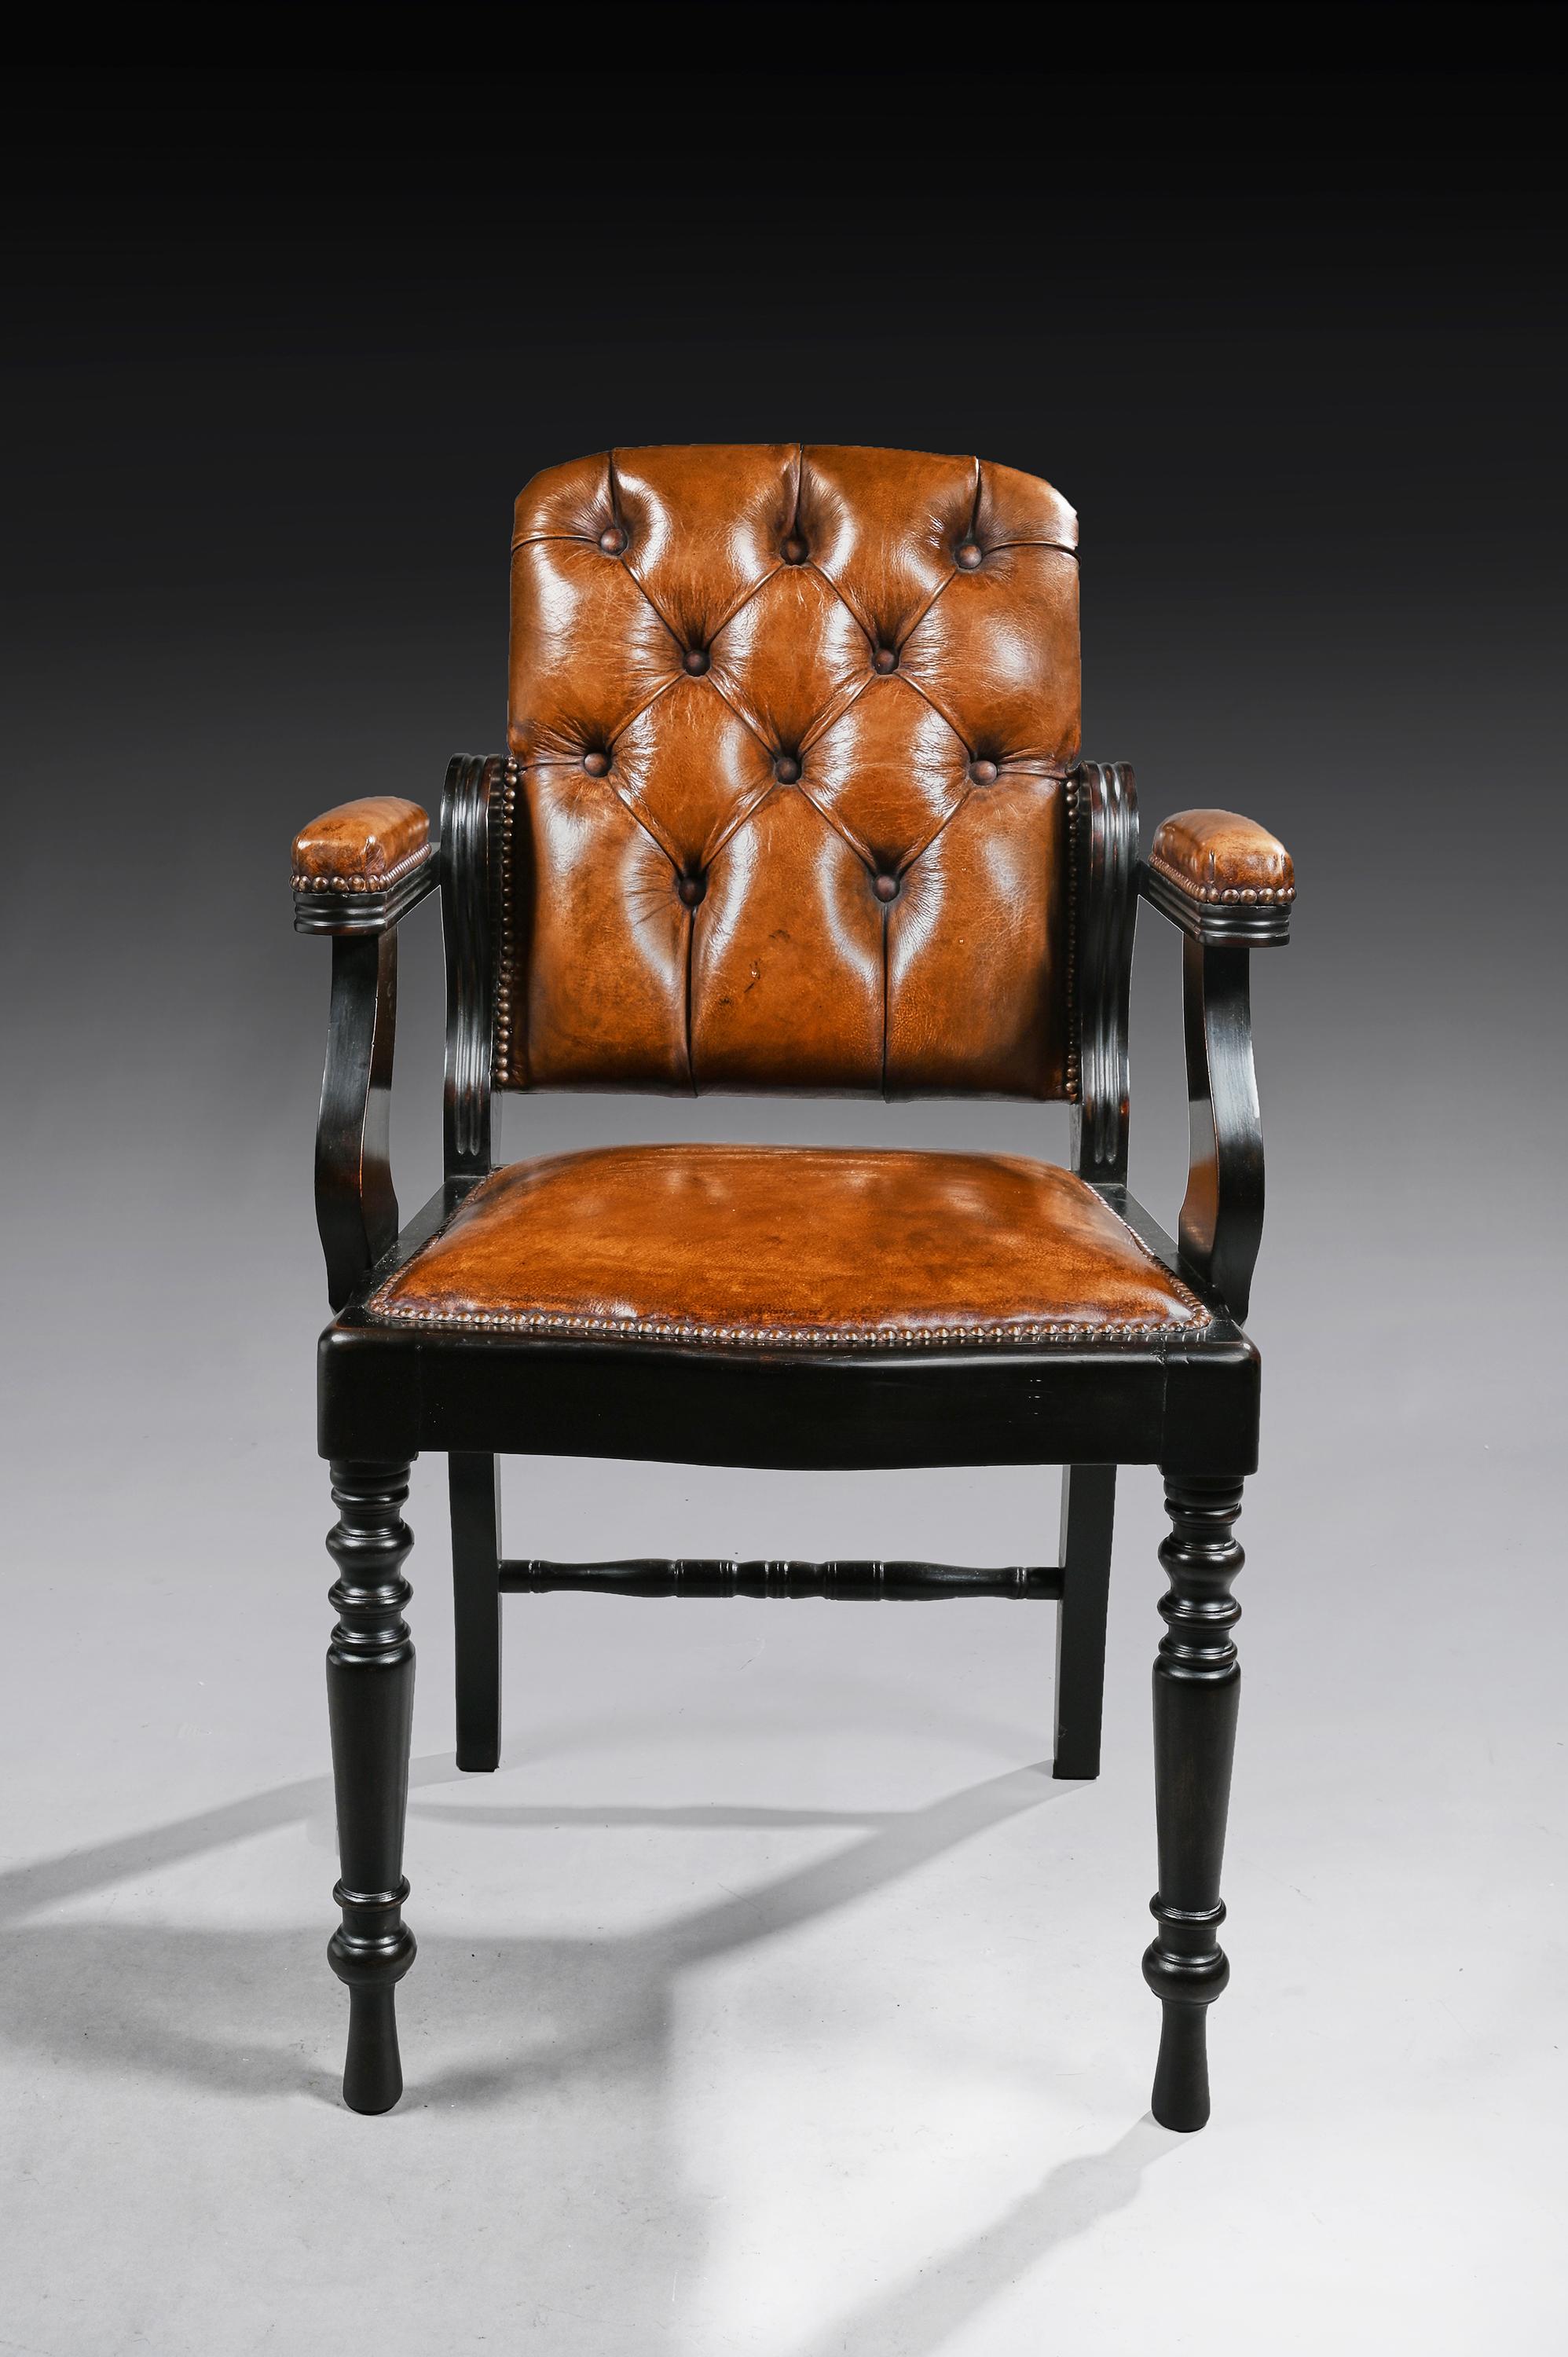 A Edwardian ebonized and leather buttoned barbers armchair / desk chair.

English, circa 1910.

This well designed chair, originally used as a barbers chair with an adjustable back, now has a fixed back so to be used as an armchair - desk chair.